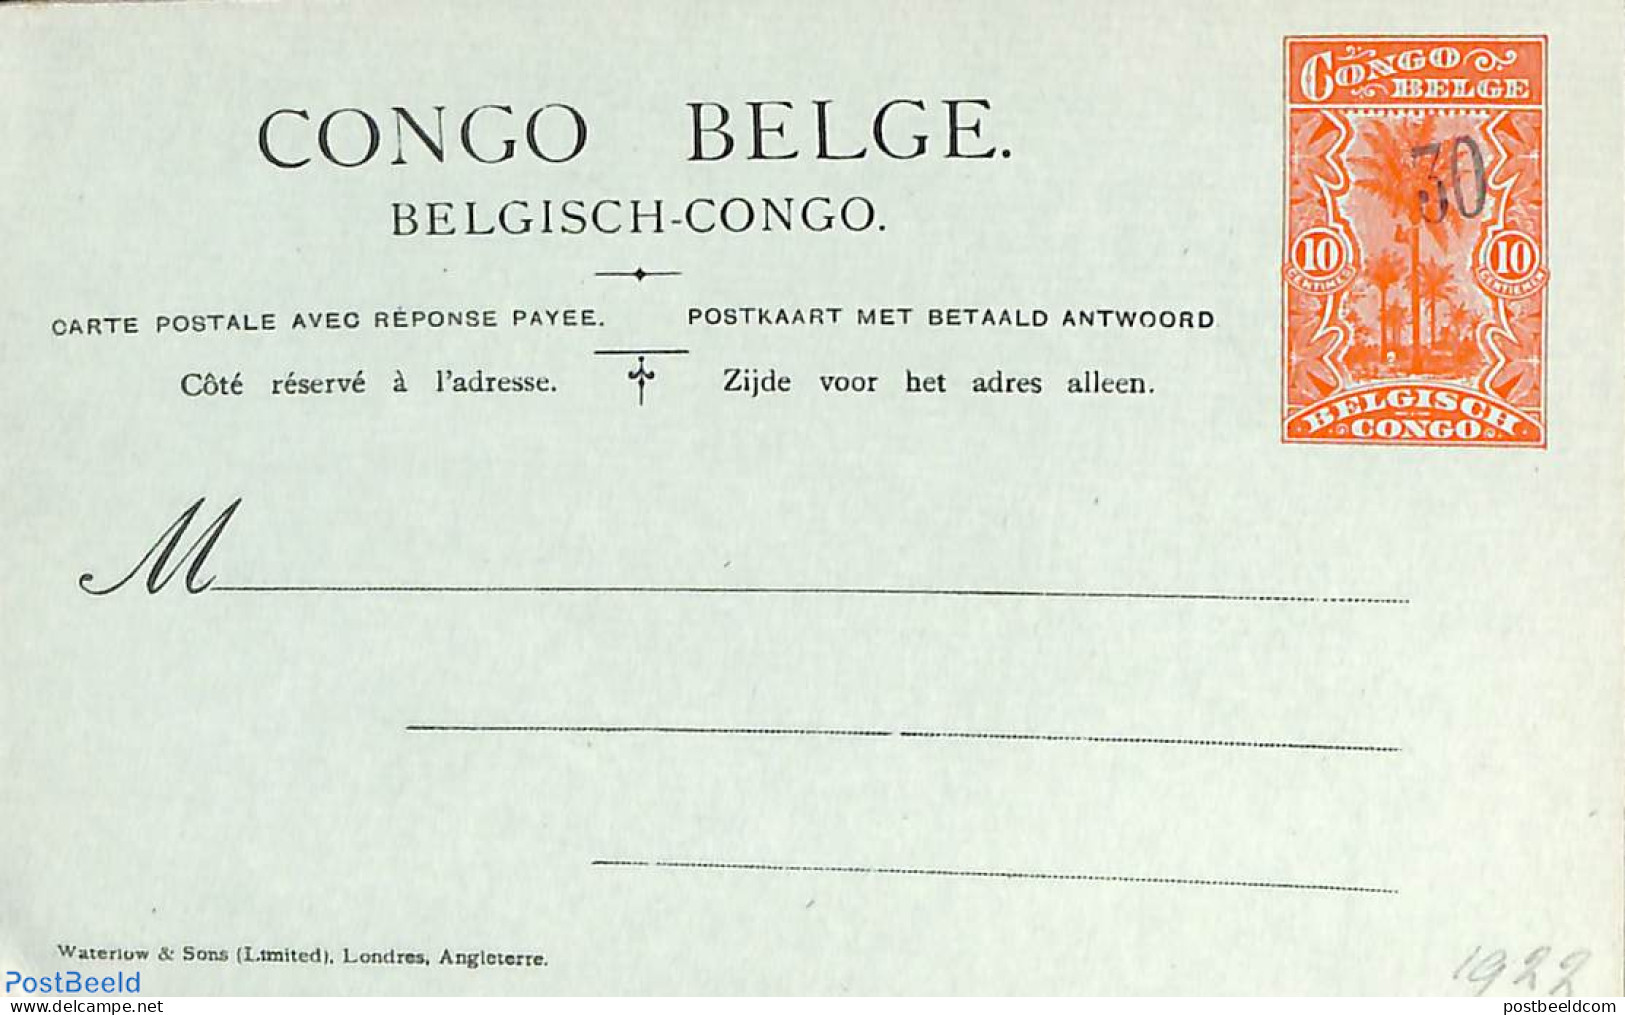 Congo Belgium 1921 Reply Paid Postcard 30on10/30on10c, Unused Postal Stationary, Nature - Trees & Forests - Rotary, Lions Club